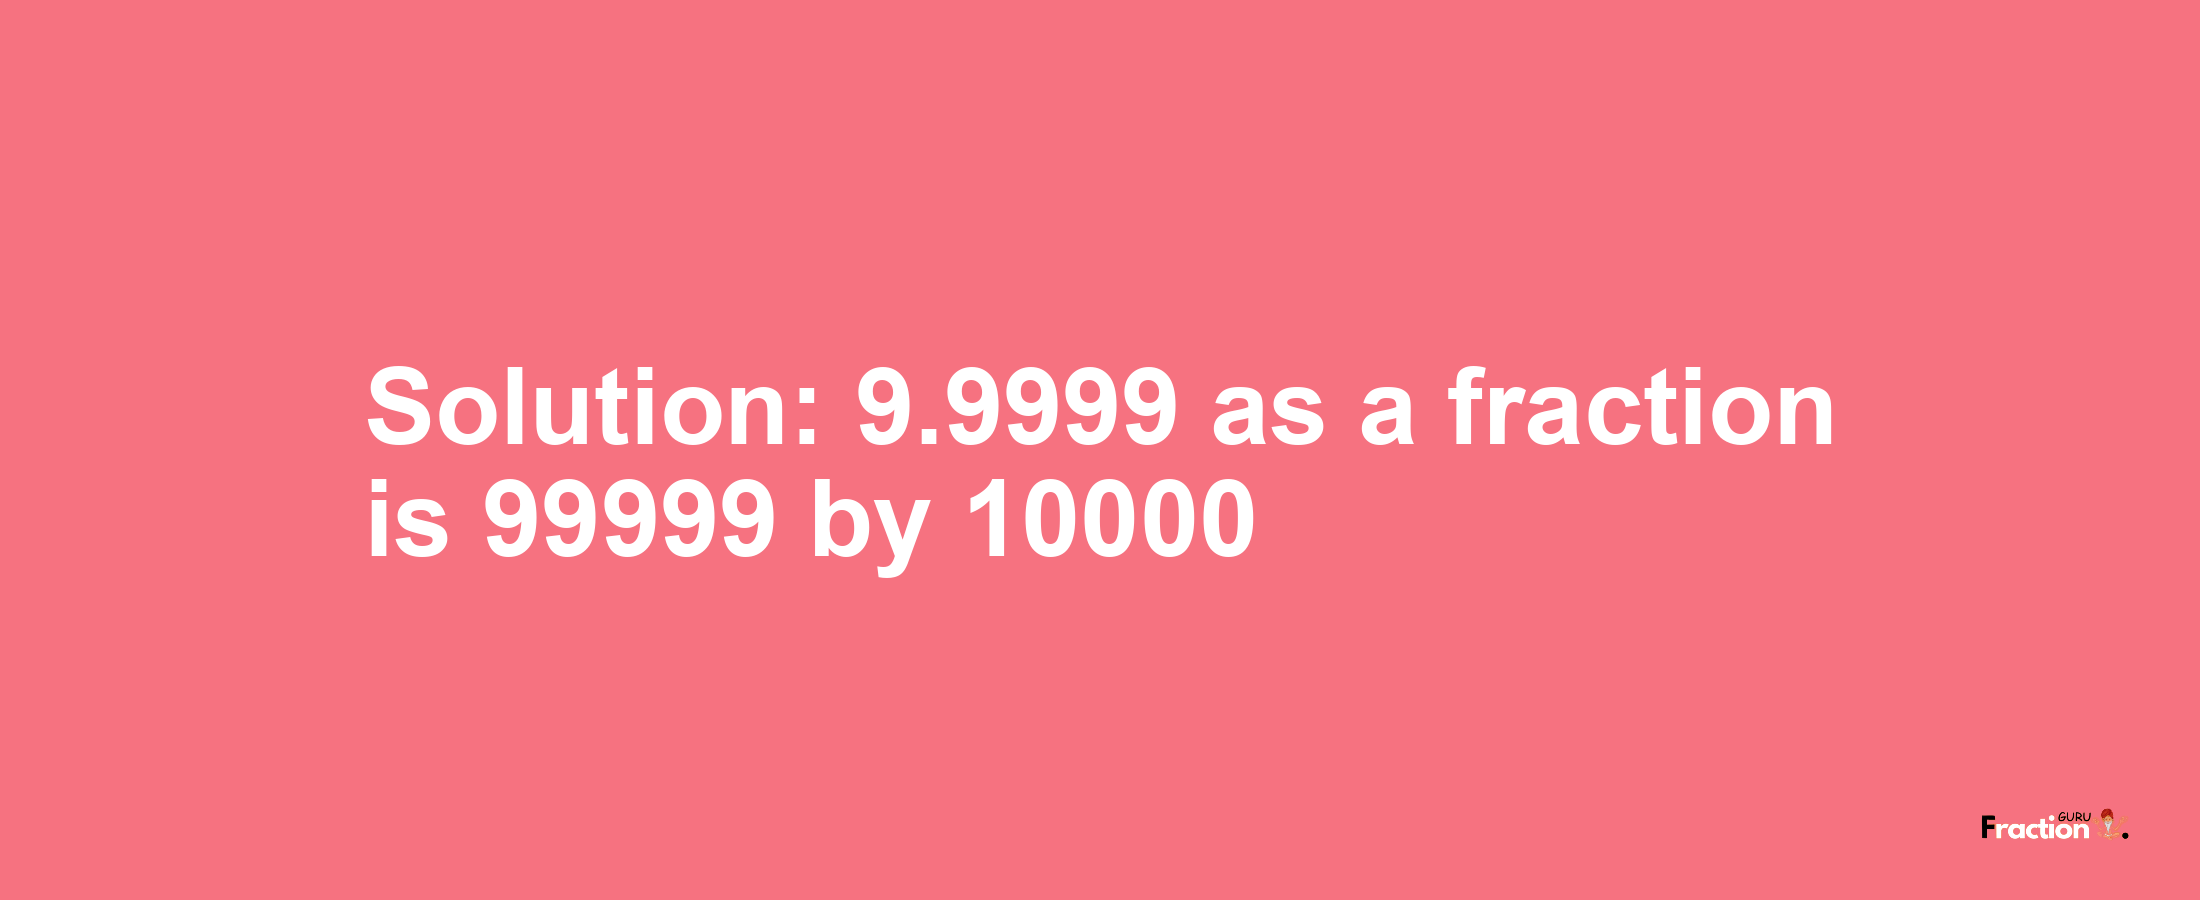 Solution:9.9999 as a fraction is 99999/10000